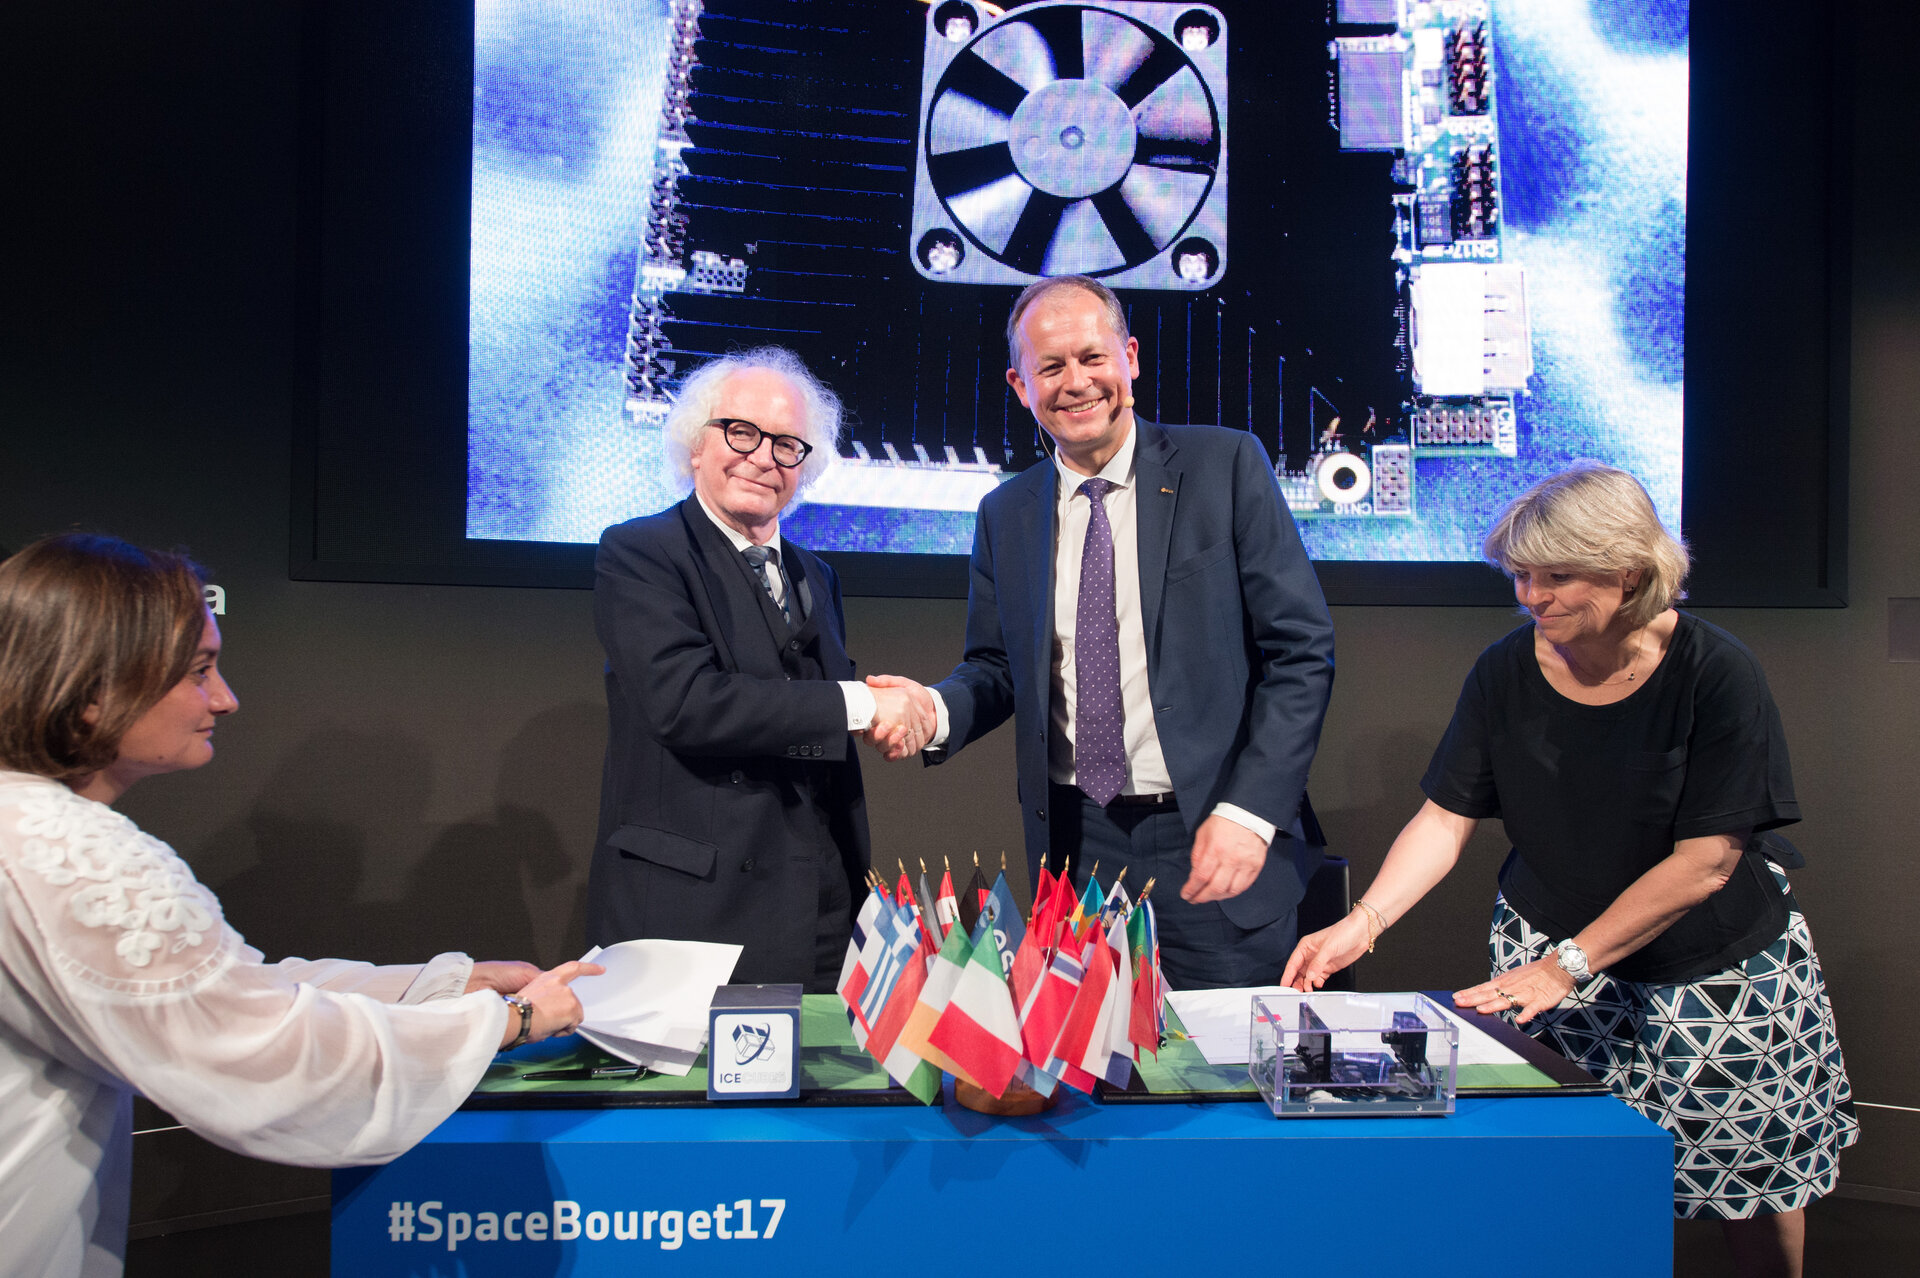 ESA signed an agreement with Space Applications Services